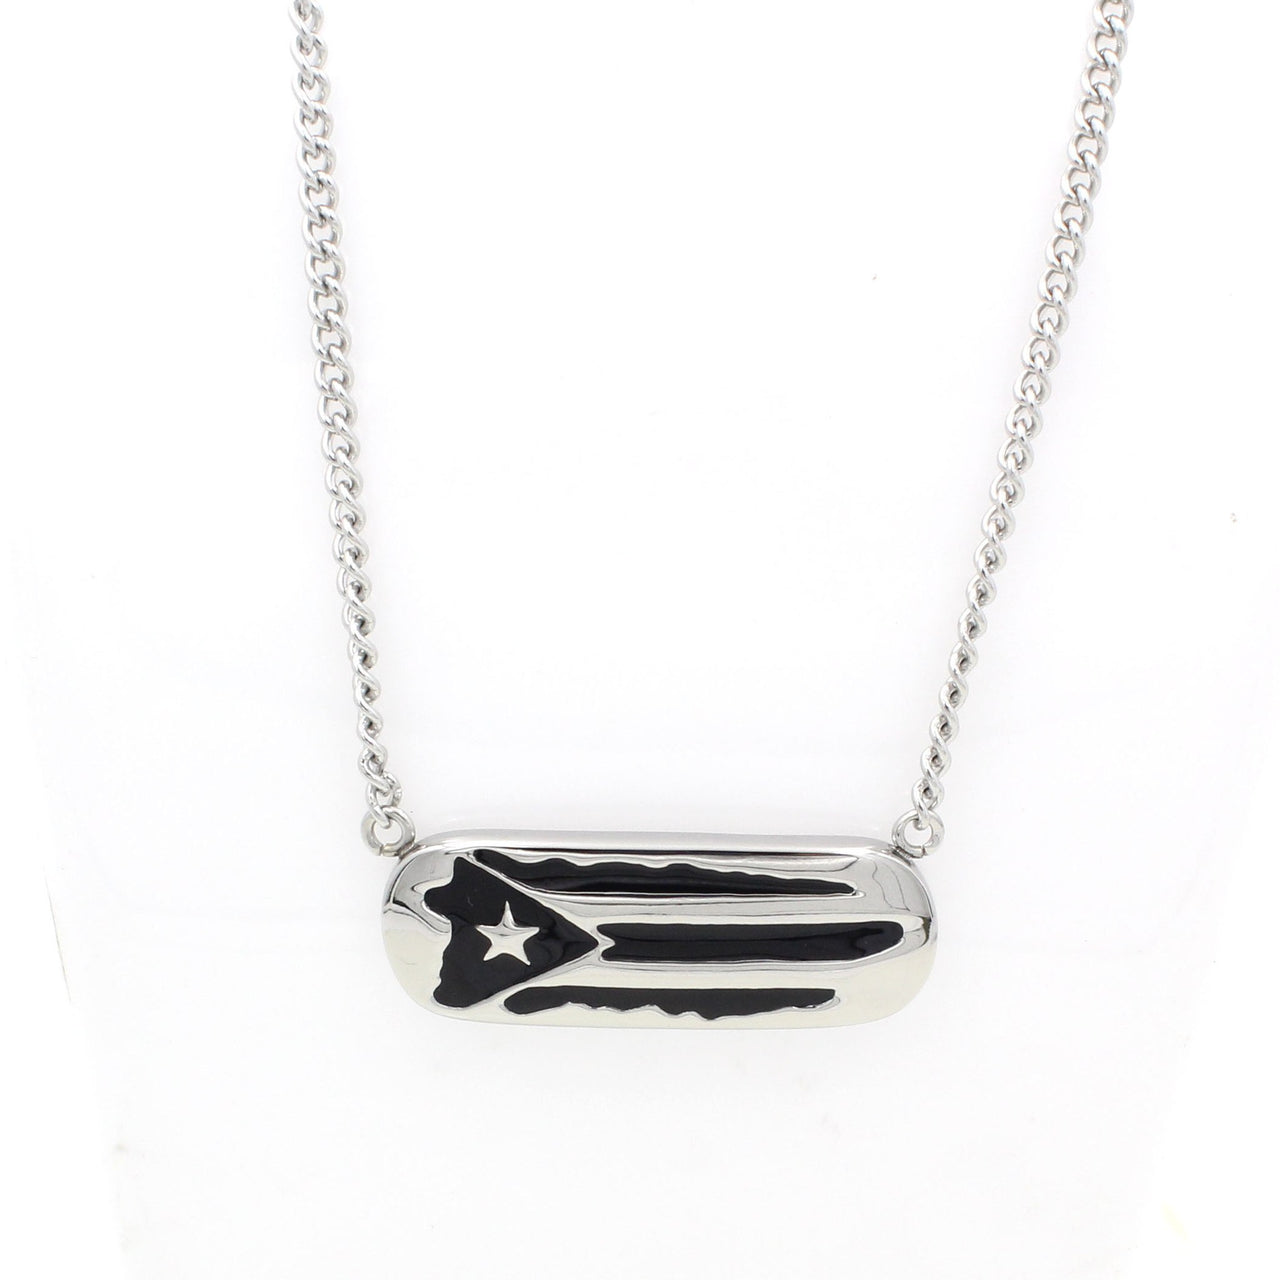 Necklace - Stainless Steel Necklace